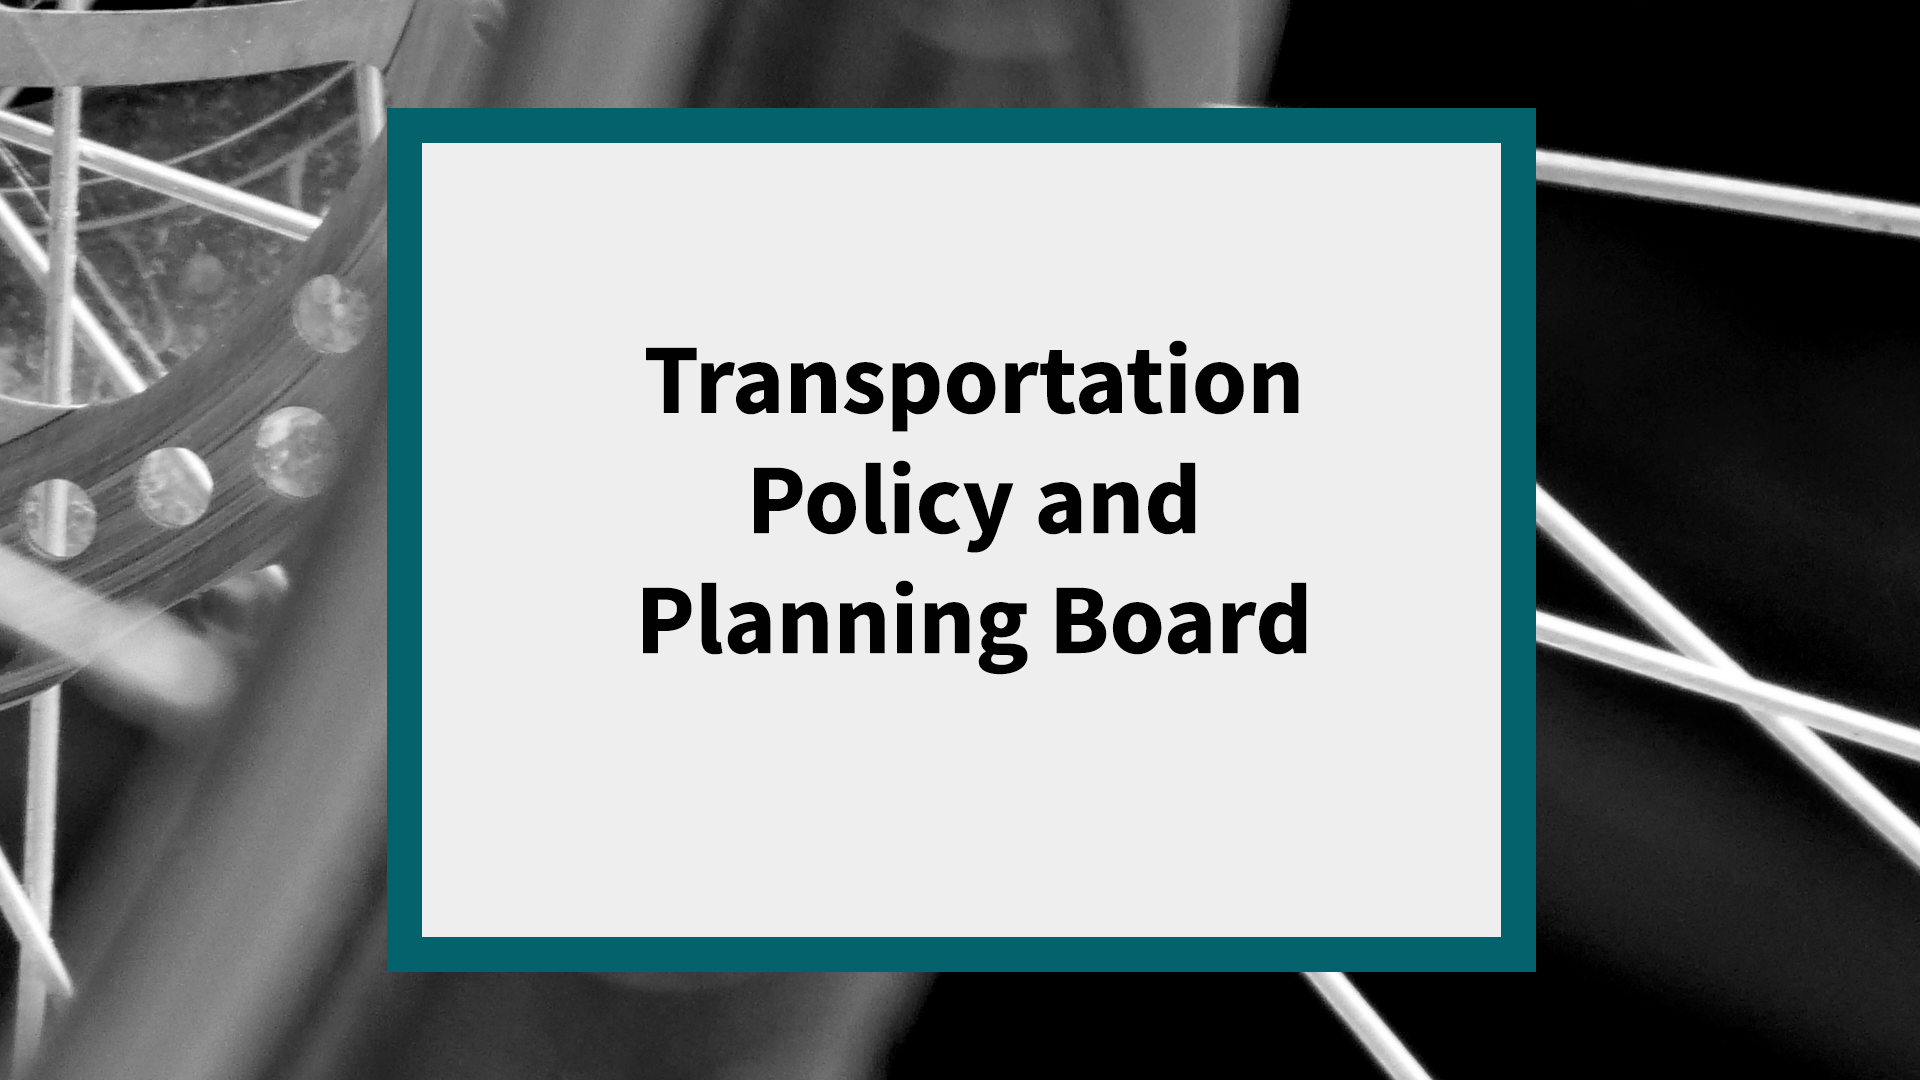 Transportation Policy and Planning Board